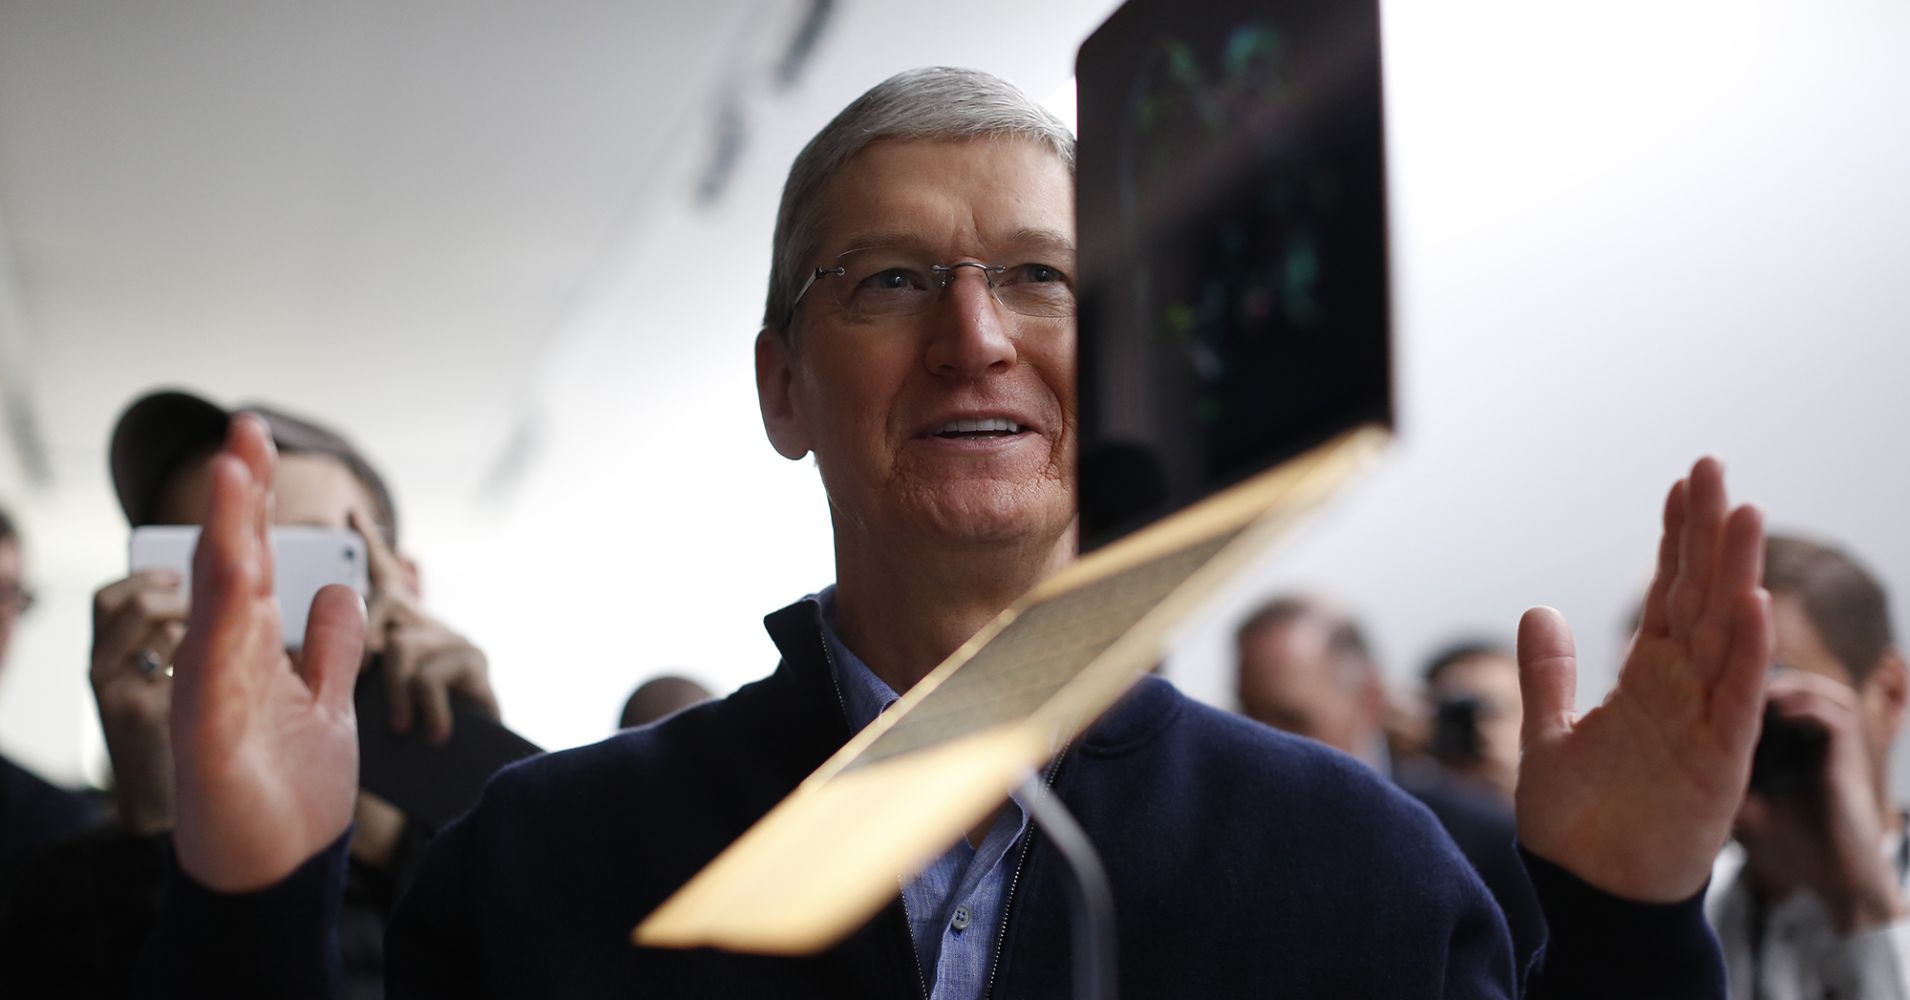 Apple CEO Tim Cook stands in front of an MacBook on display after an Apple special event at the Yerba Buena Center for the Arts on March 9, 2015 in San Francisco, California.